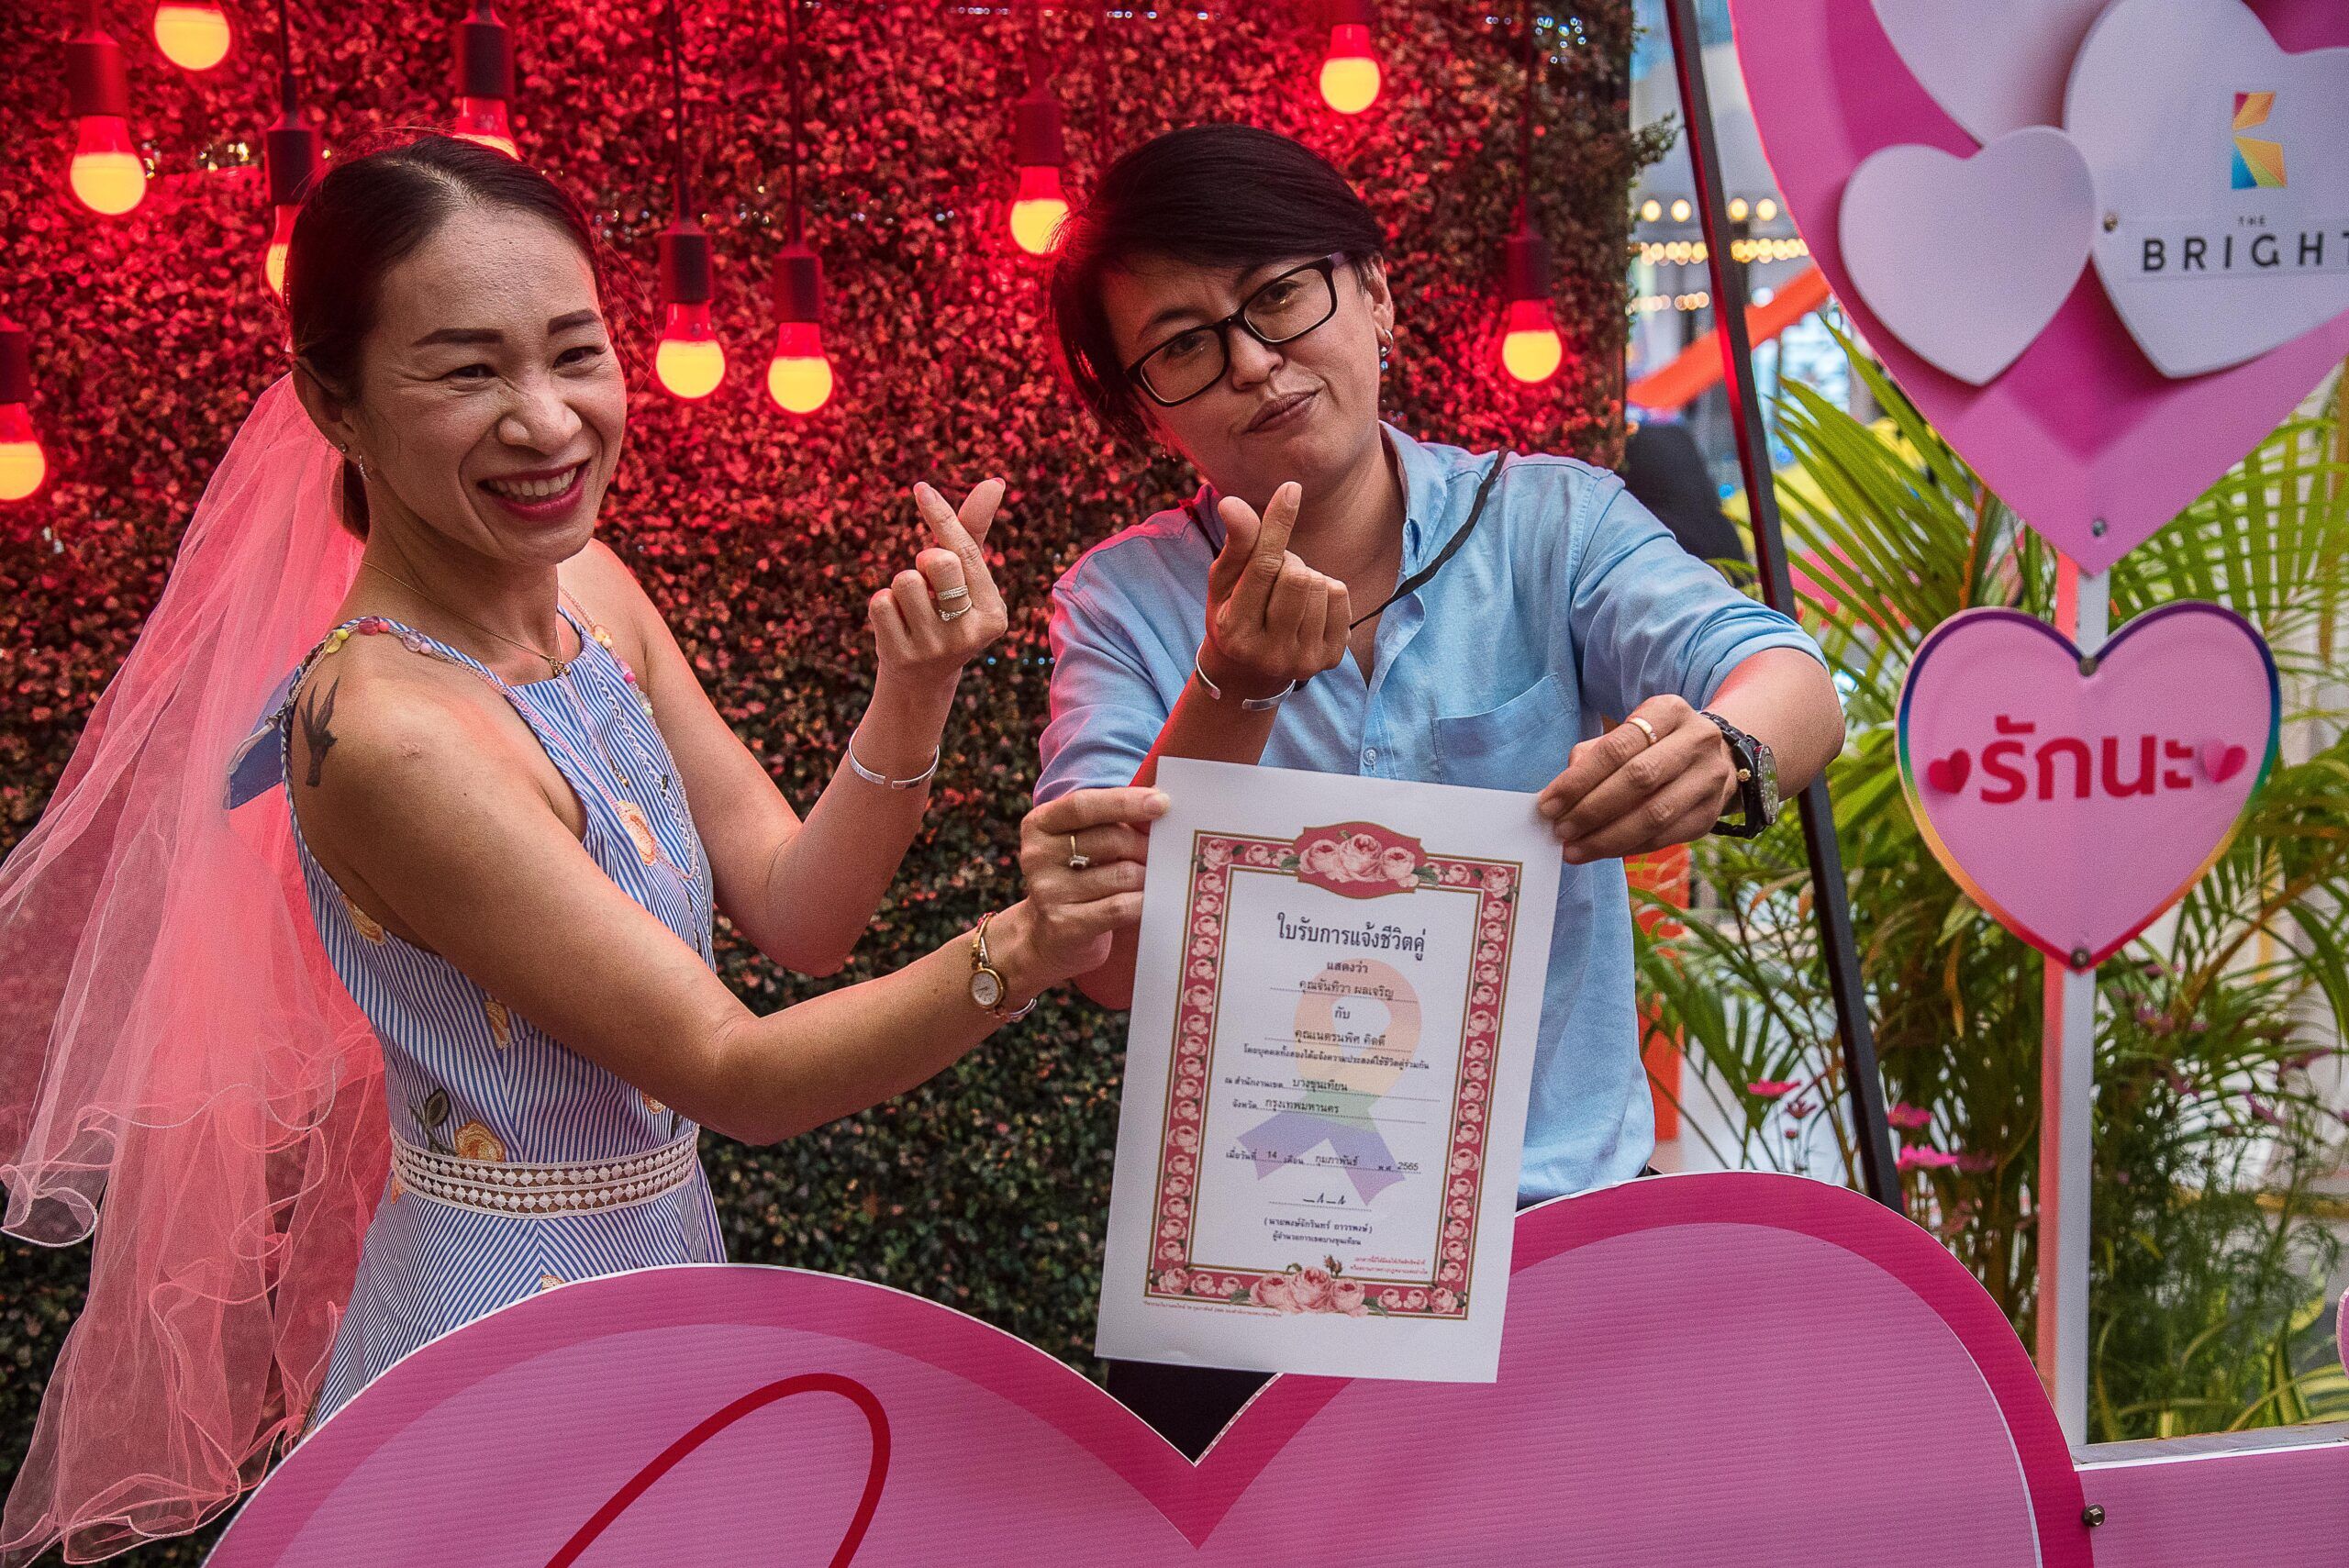 A Thai LGBTQ couple show their marriage certificate during the Marriage registration event hosted by the Bang Khun Thian District on Valentines Day in Bangkok. The Bang Khun Thian District Office organized a marriage registration event for LGBTQ couples, which is the first time in Thailand to promote and support equal marriage in Thailand. The marriage registration of LGBTQ couples is not yet legal as Thailand's equal marriage law has not been passed by Parliament.